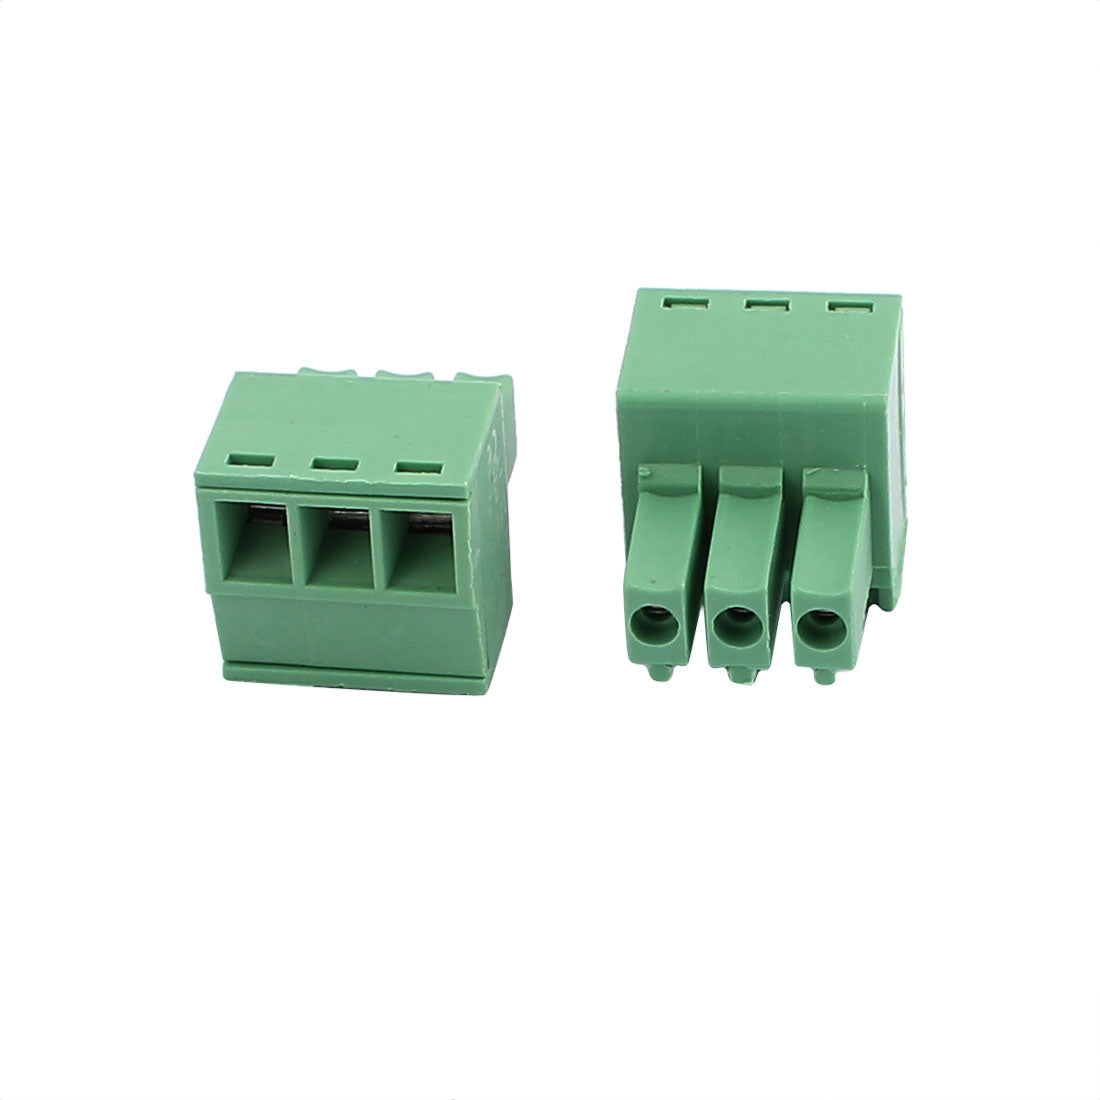 uxcell Uxcell 50Pcs 300V KF2EDGK 3.5mm Pitch 3-Pin PCB Screw Terminal Block Connector